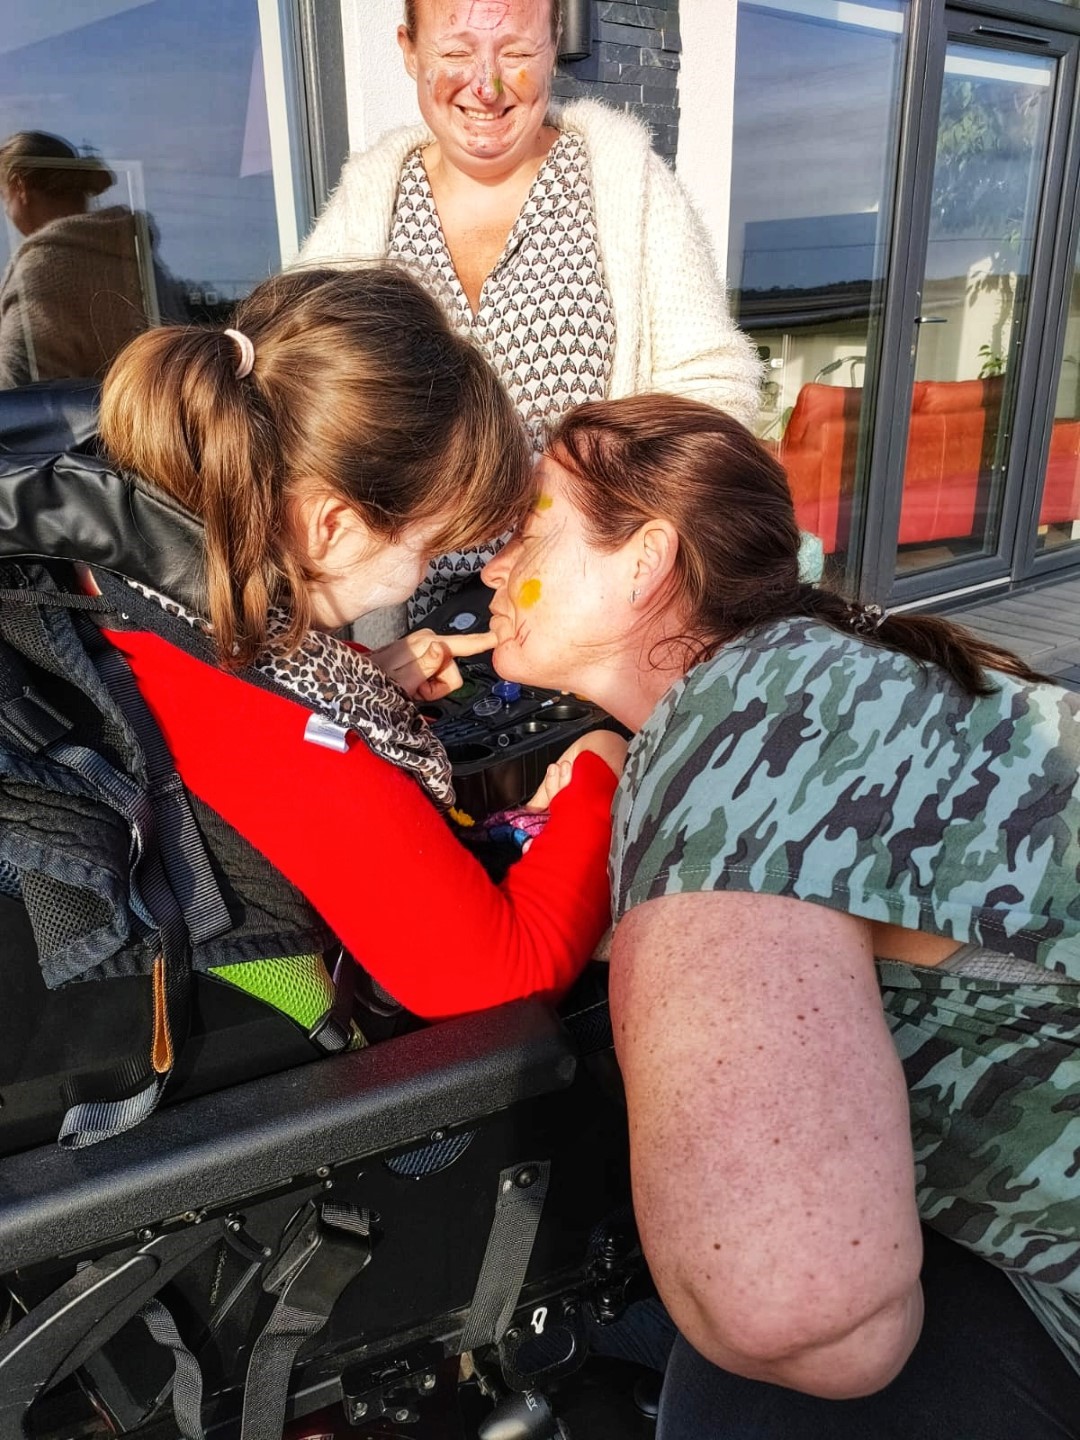 Young girl in a wheelchair touching lady's face with face paints. Lady stood to left laughing.